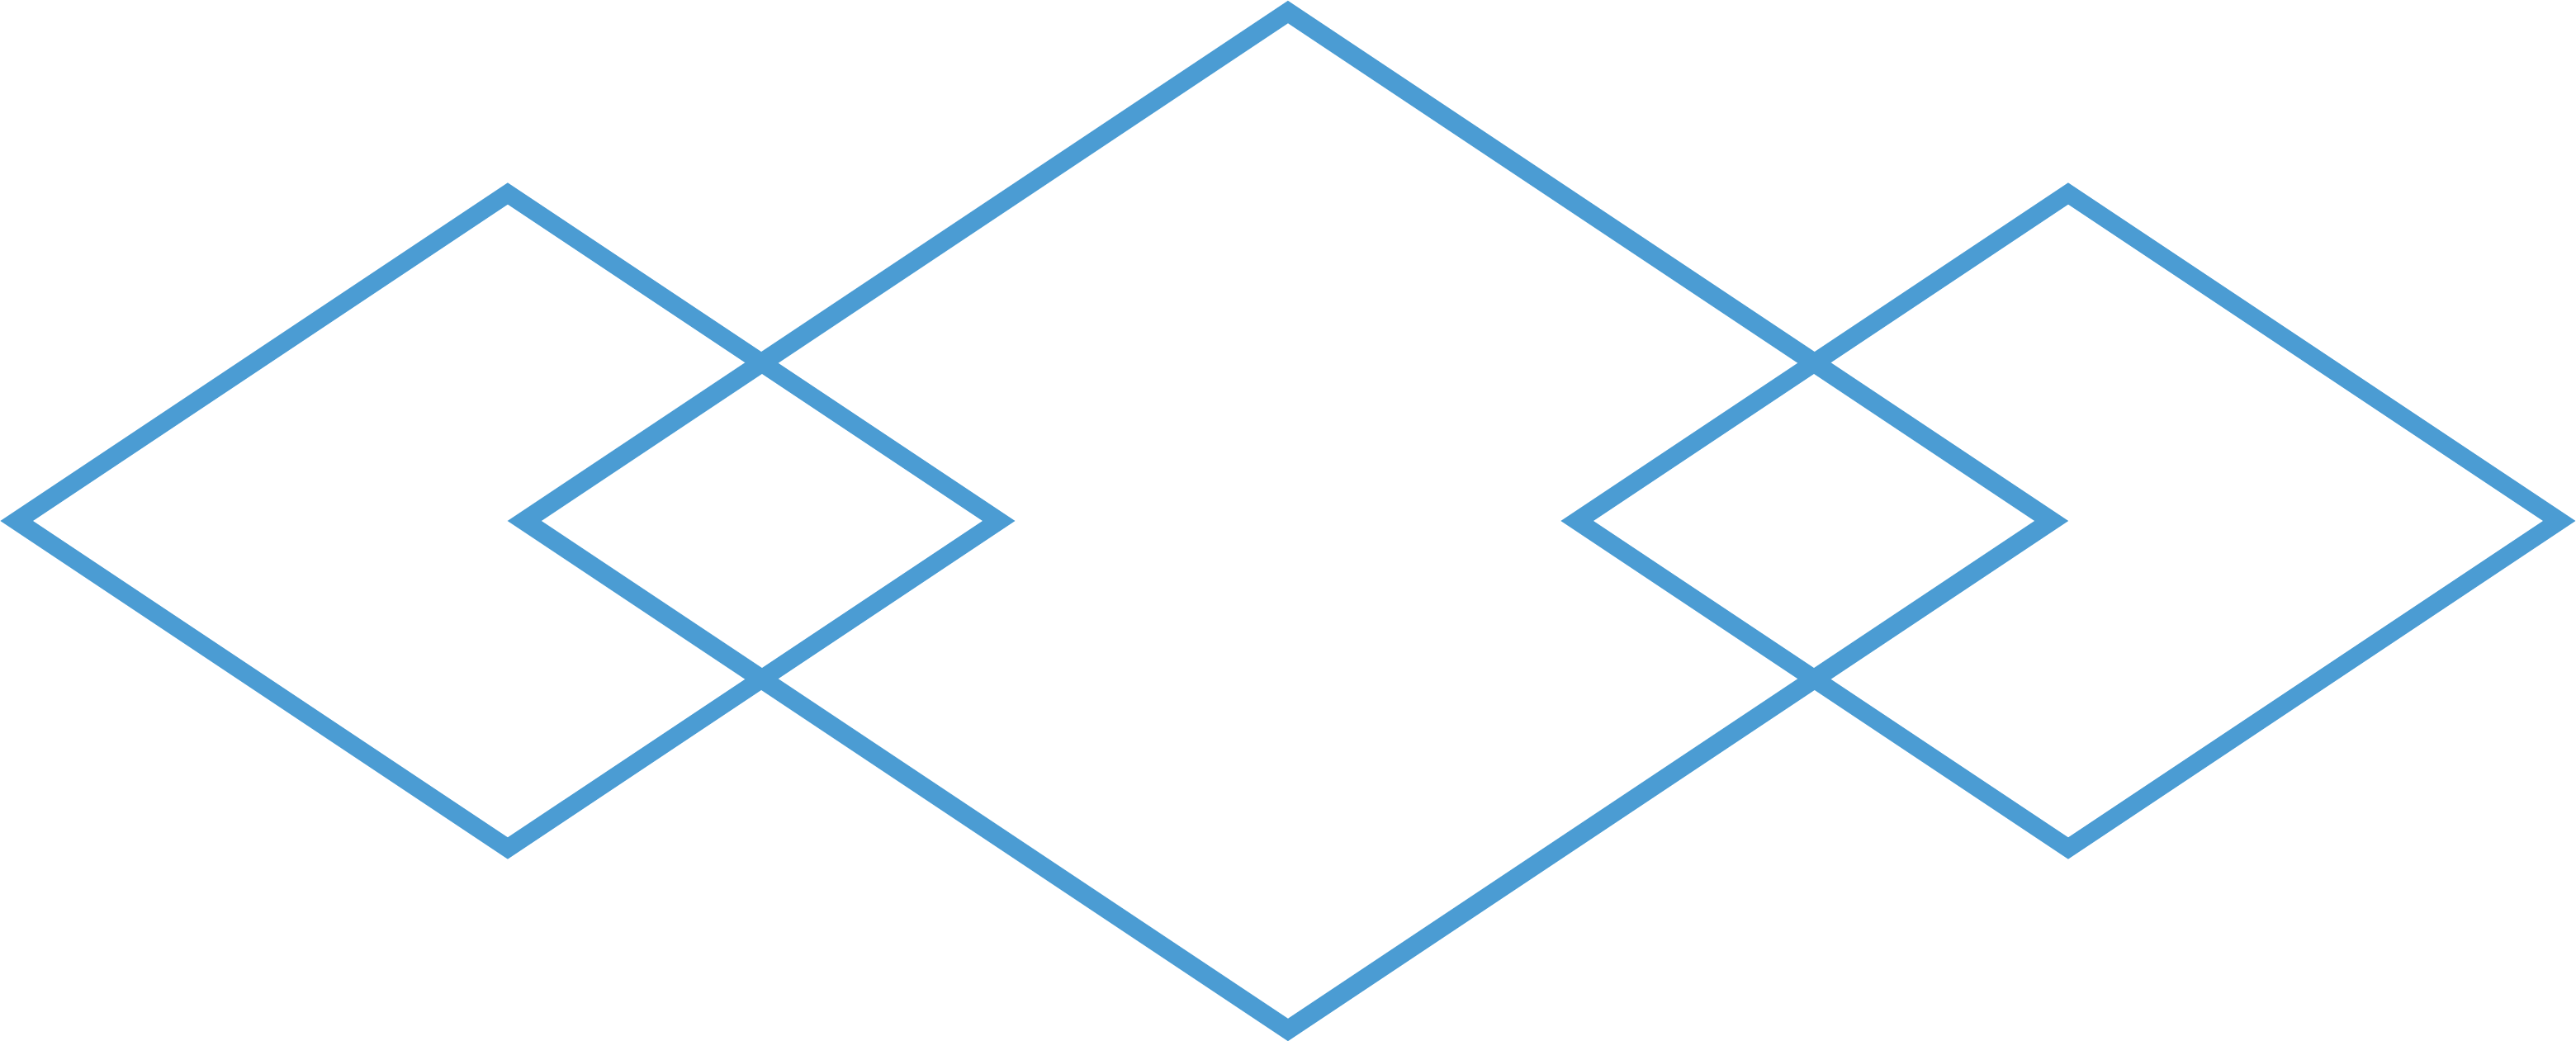 Three overlapping diamond shapes in white with thin Carolina Blue outline.